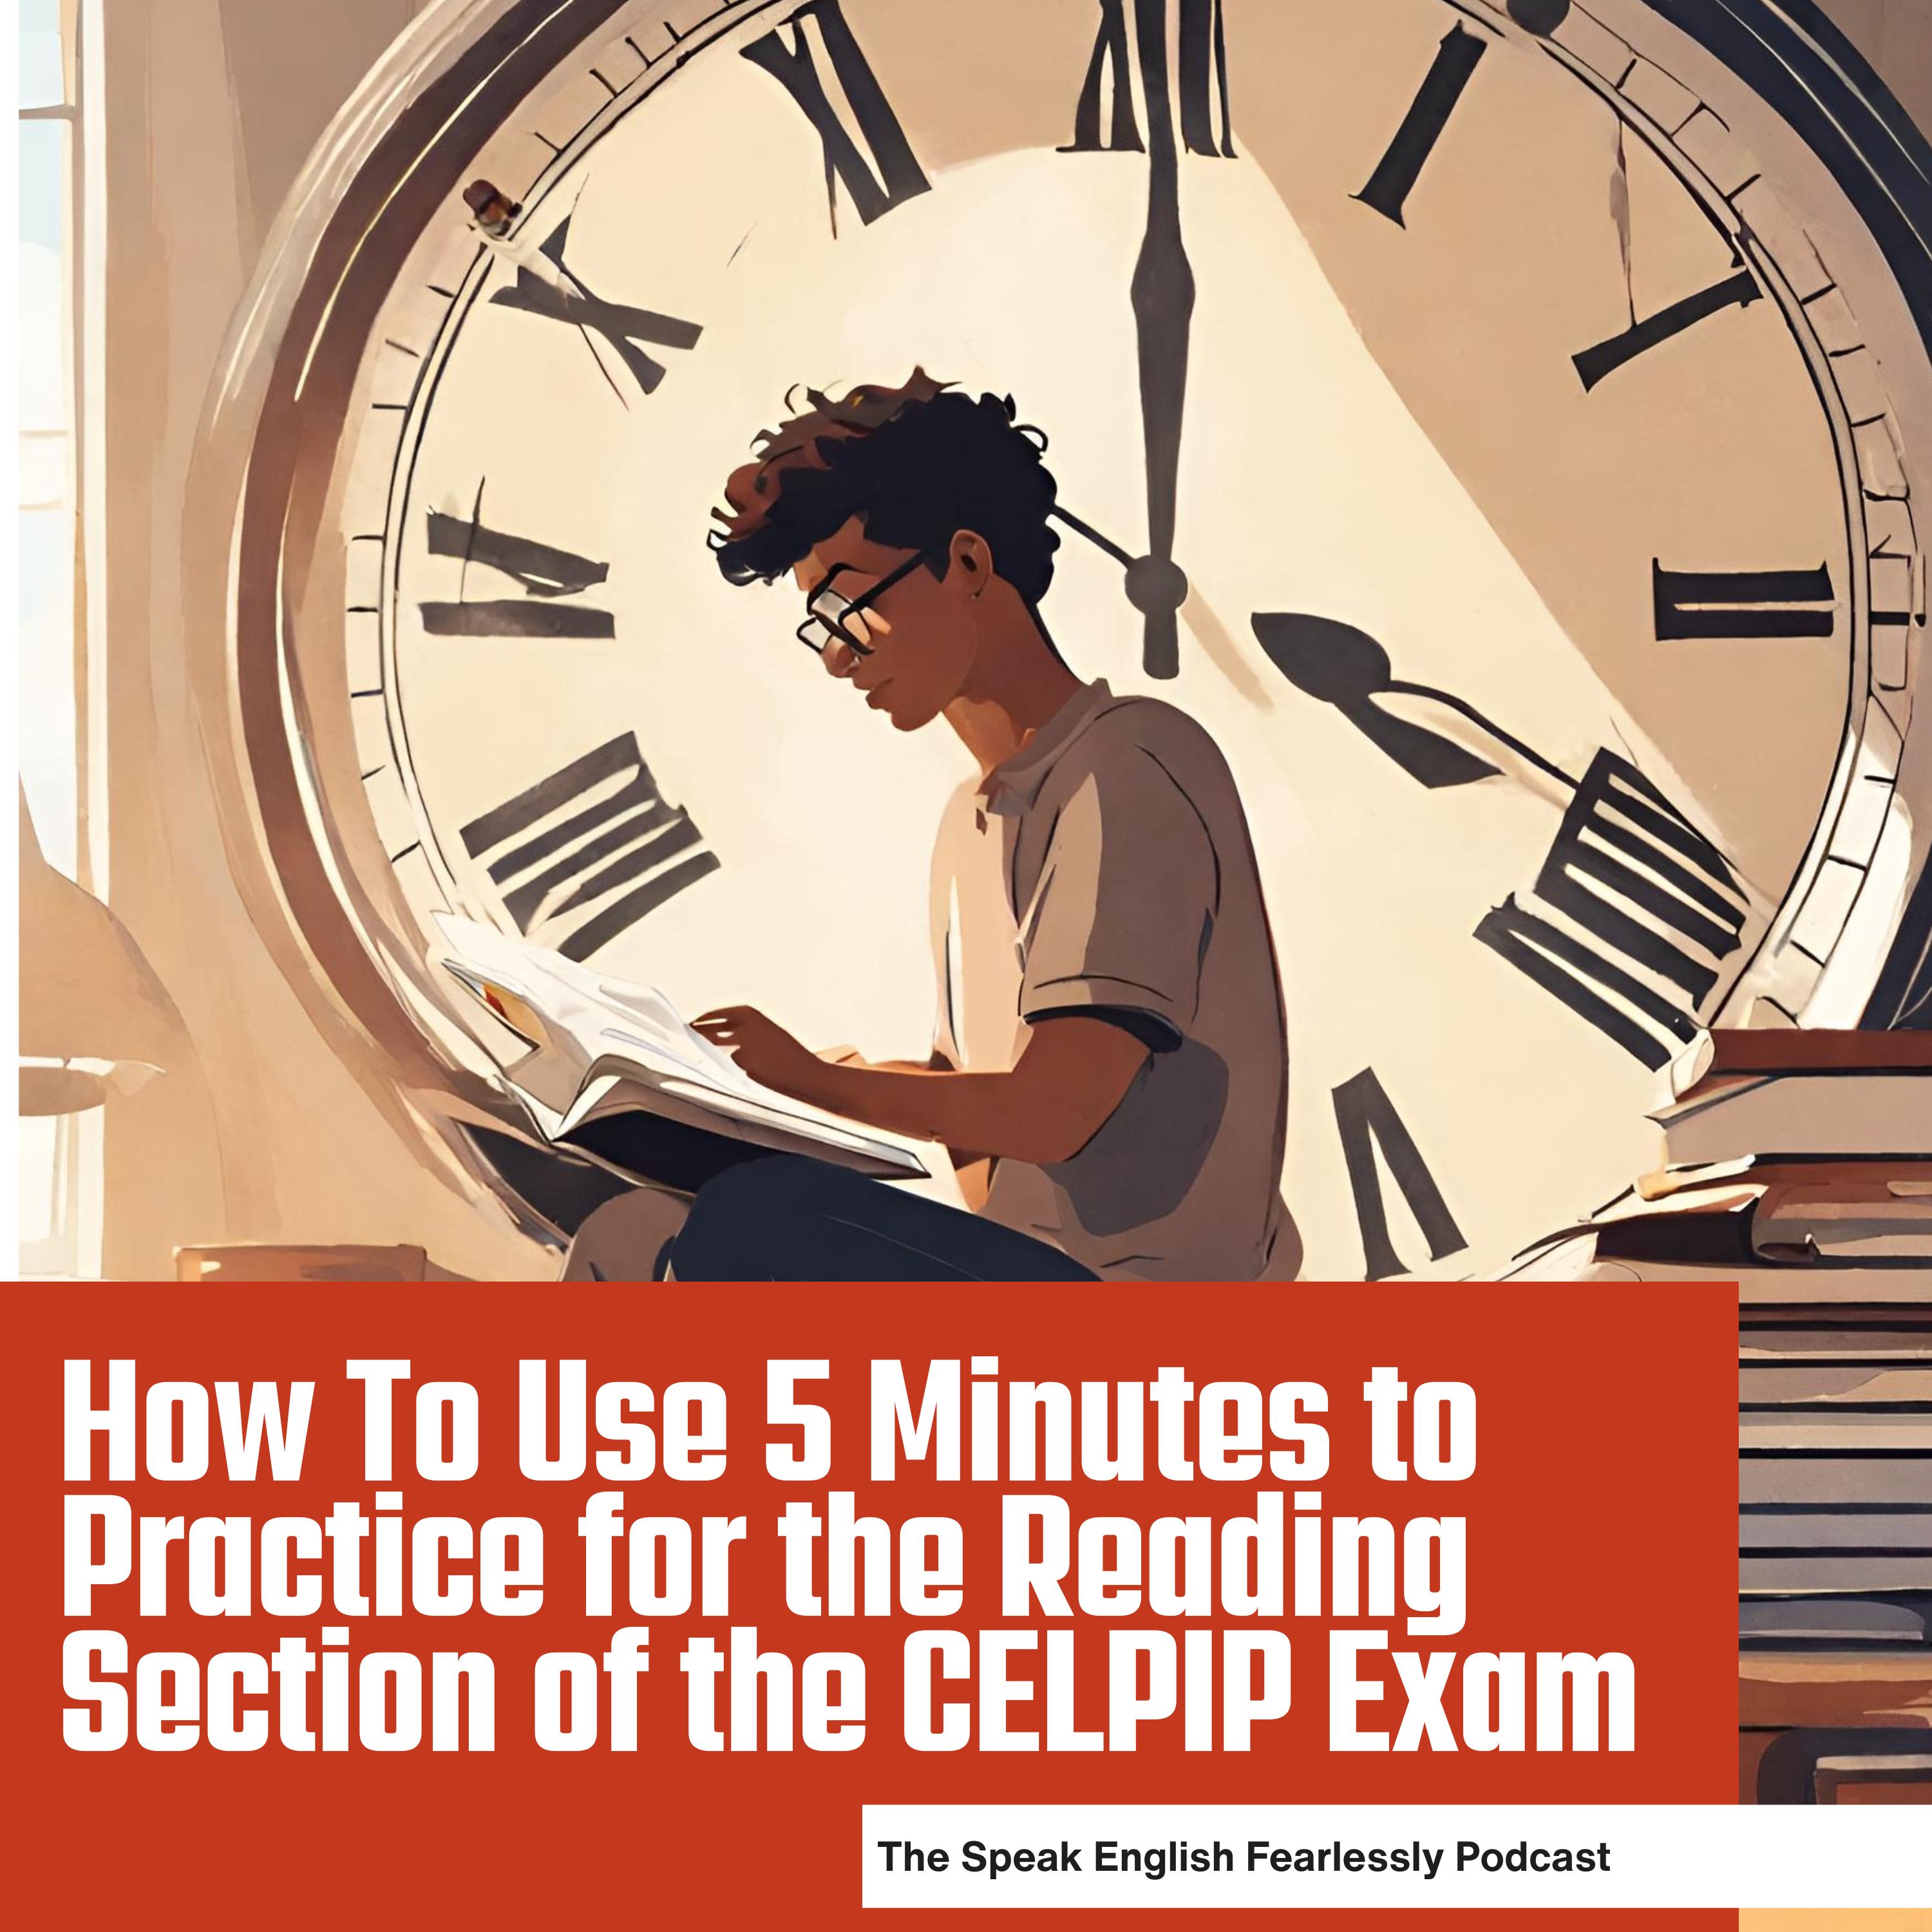 How To Use 5 Minutes to Practice For the Reading Section Of The CELPIP Exam